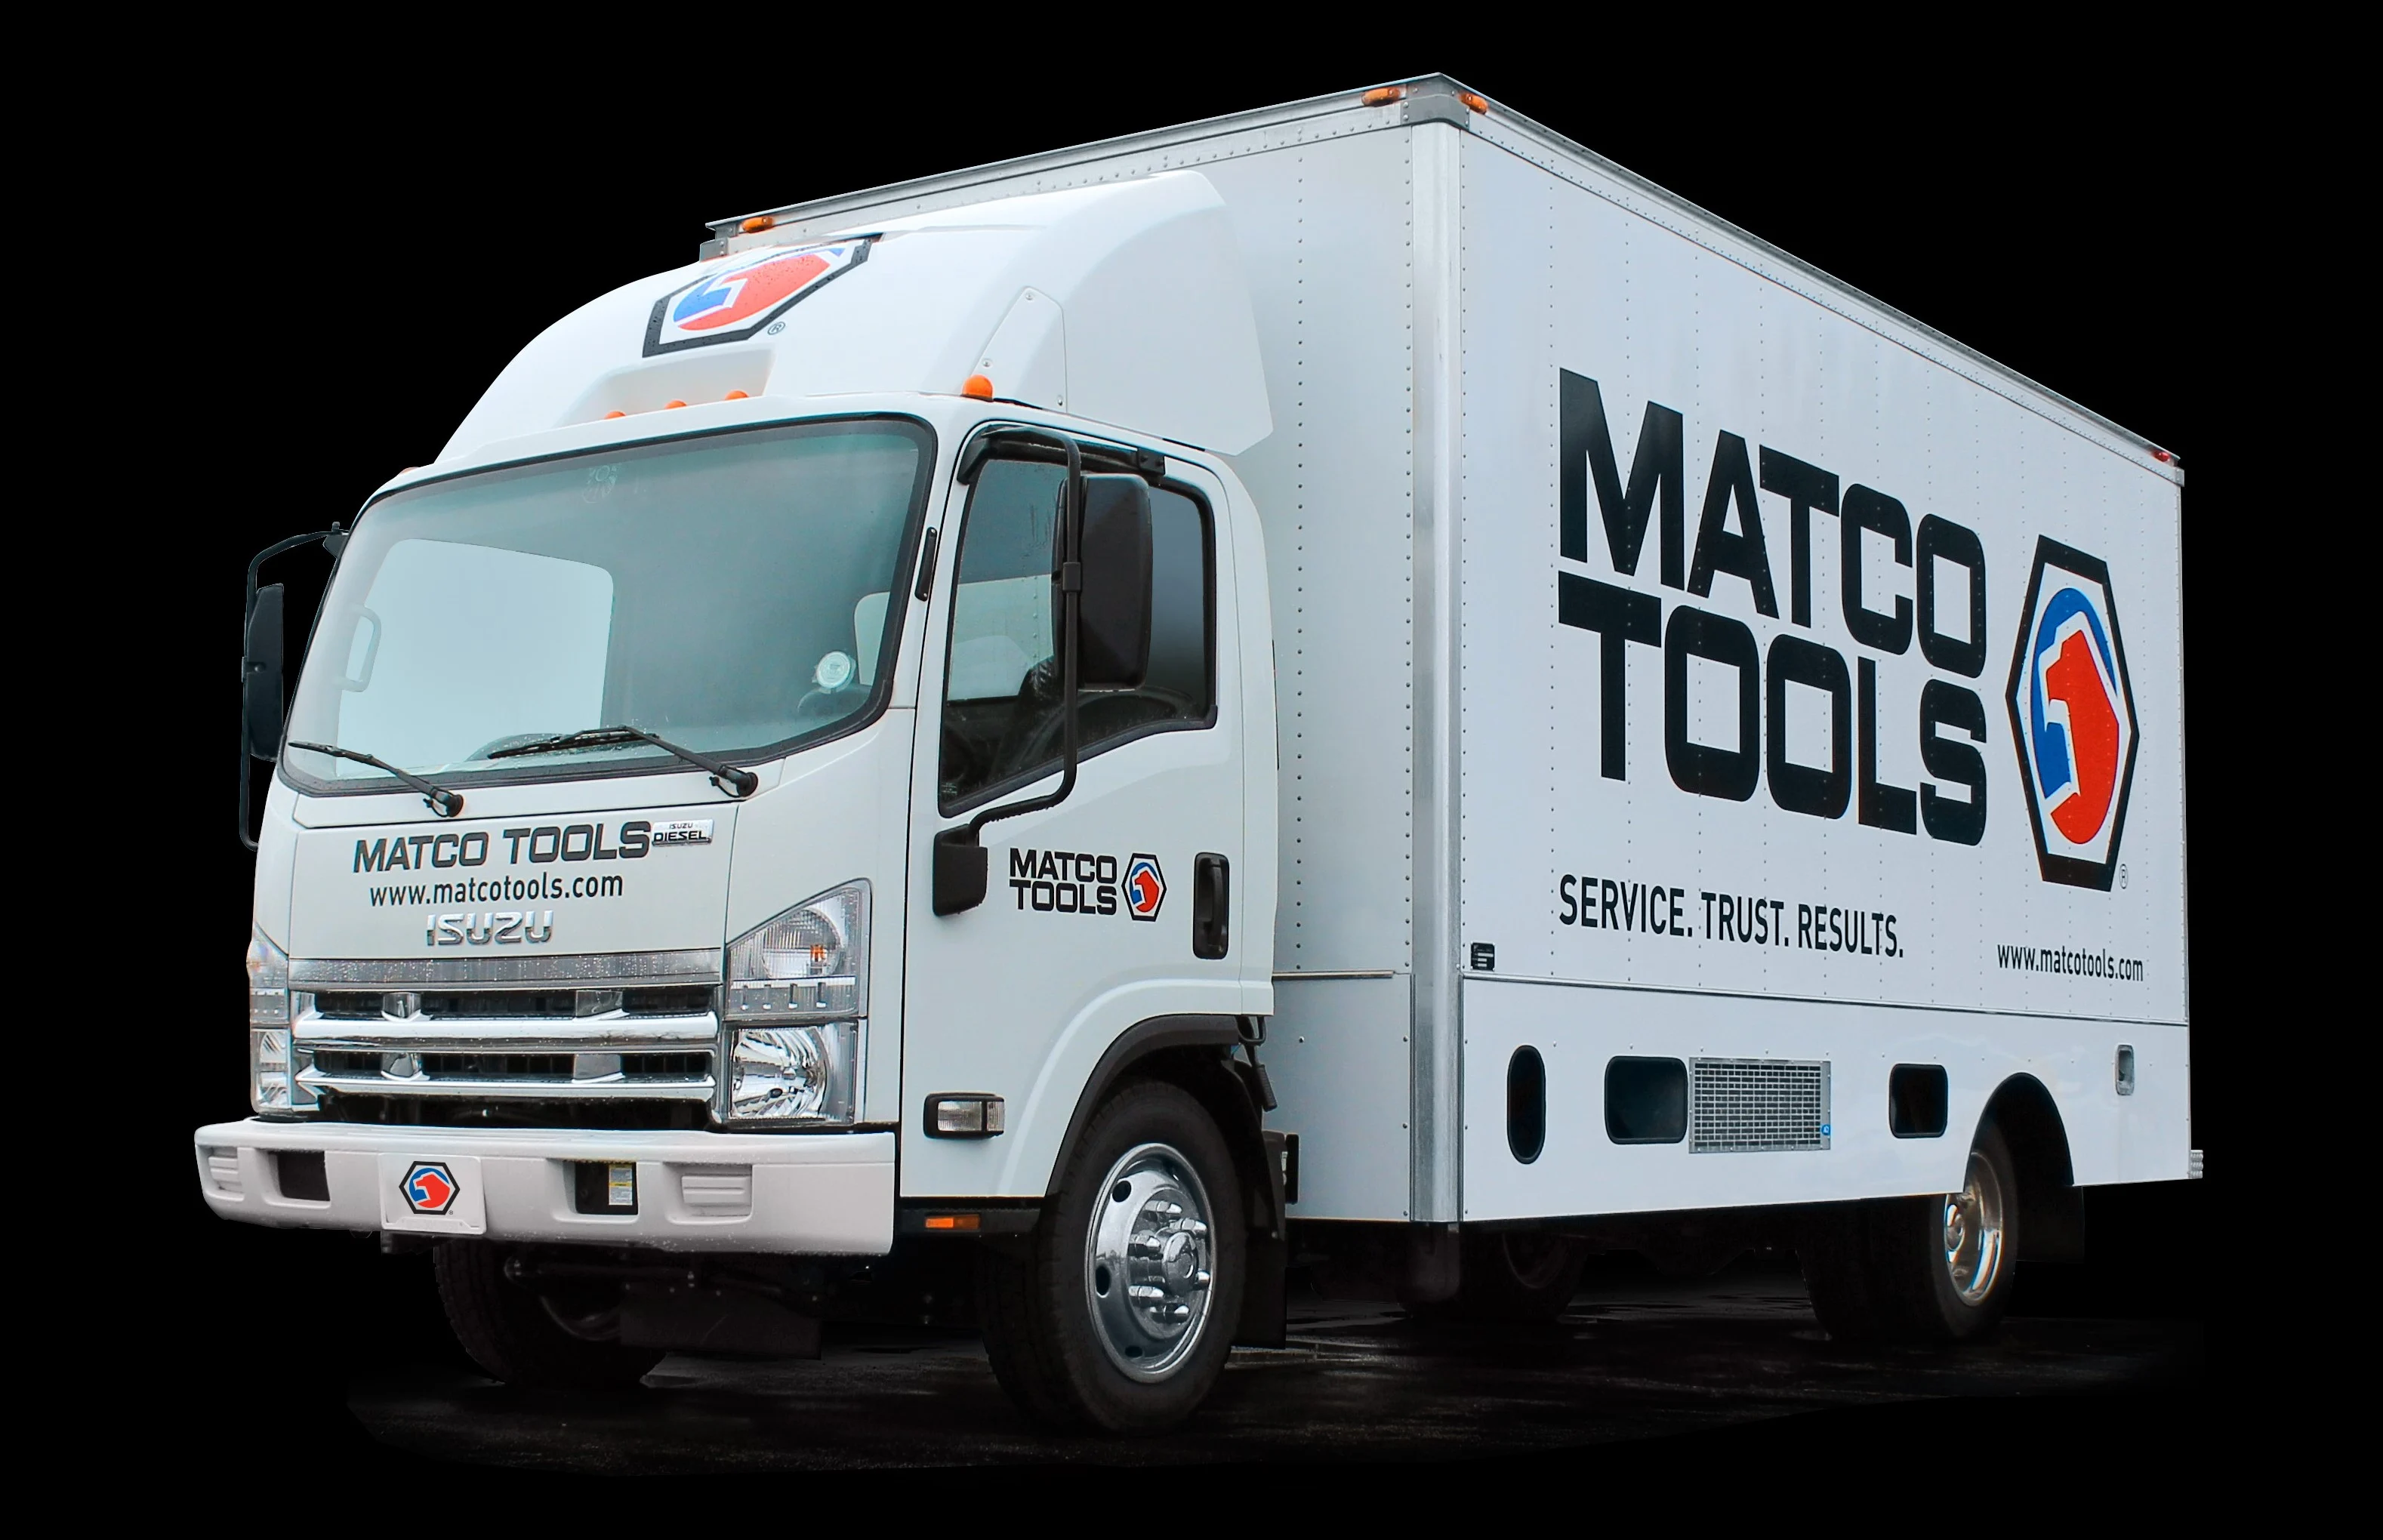 matco truck work from home franchise